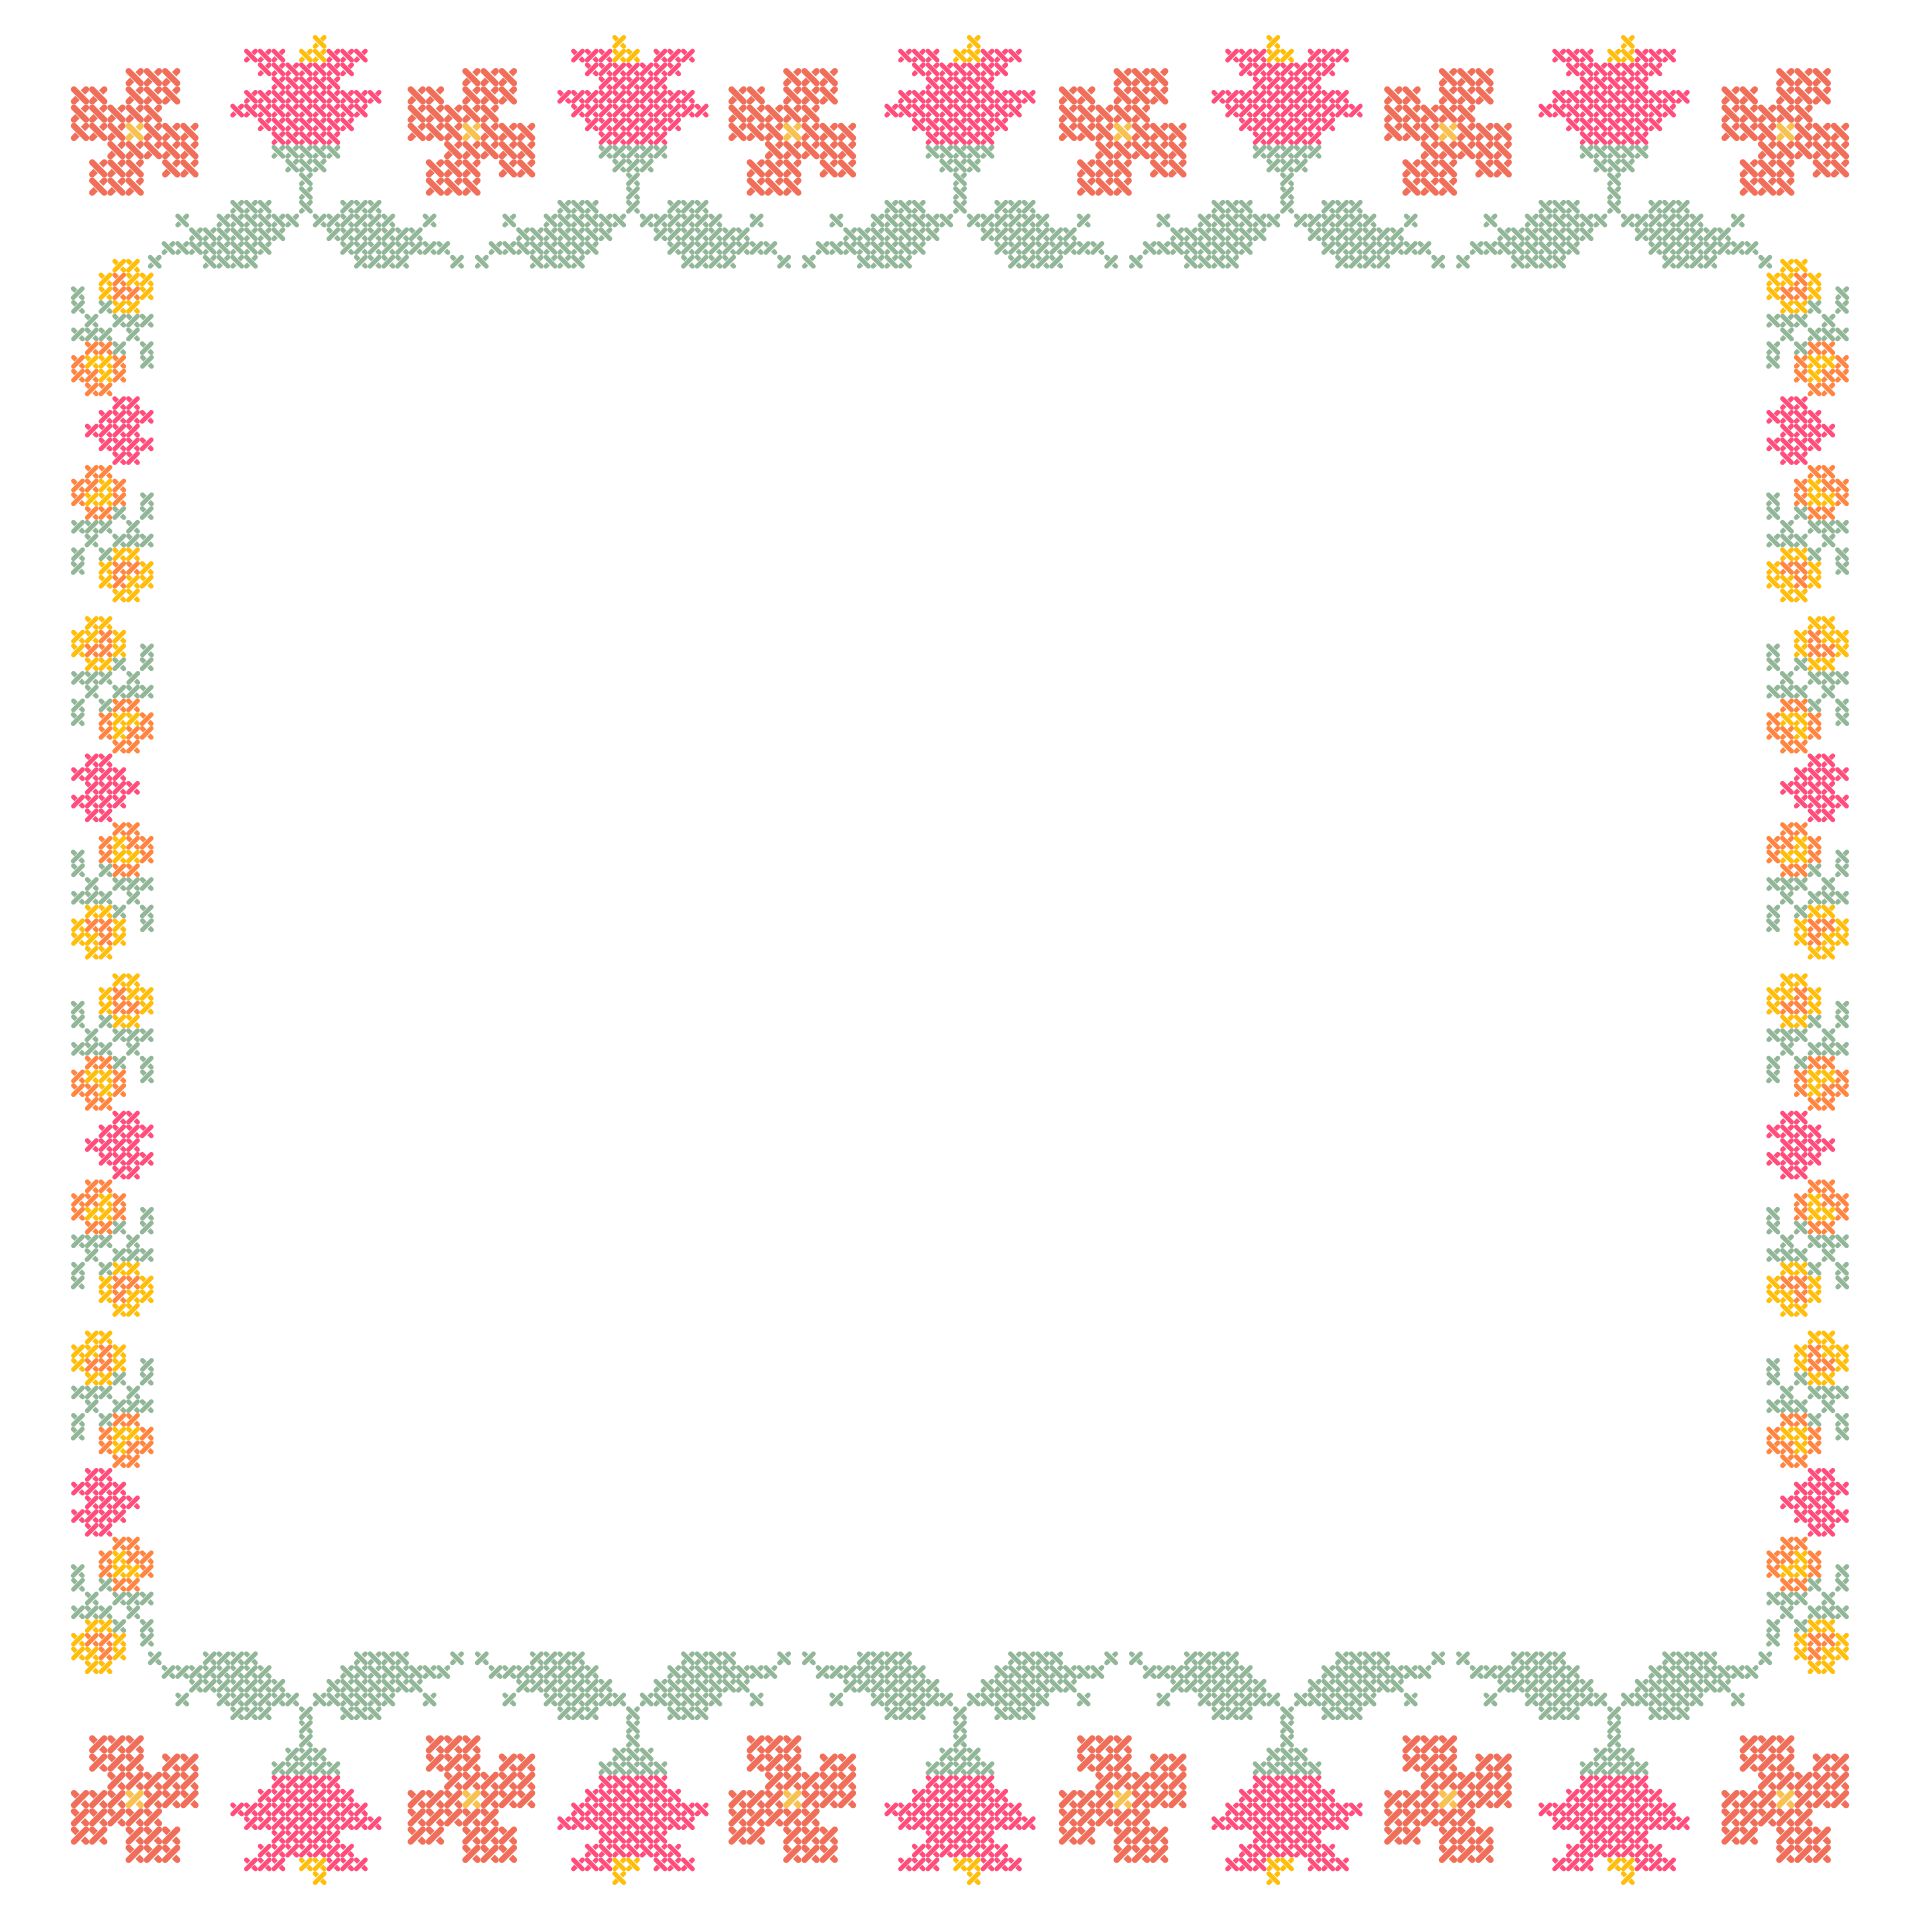 Free Printable Patterns For Borders For Cross Stitch - We at ...